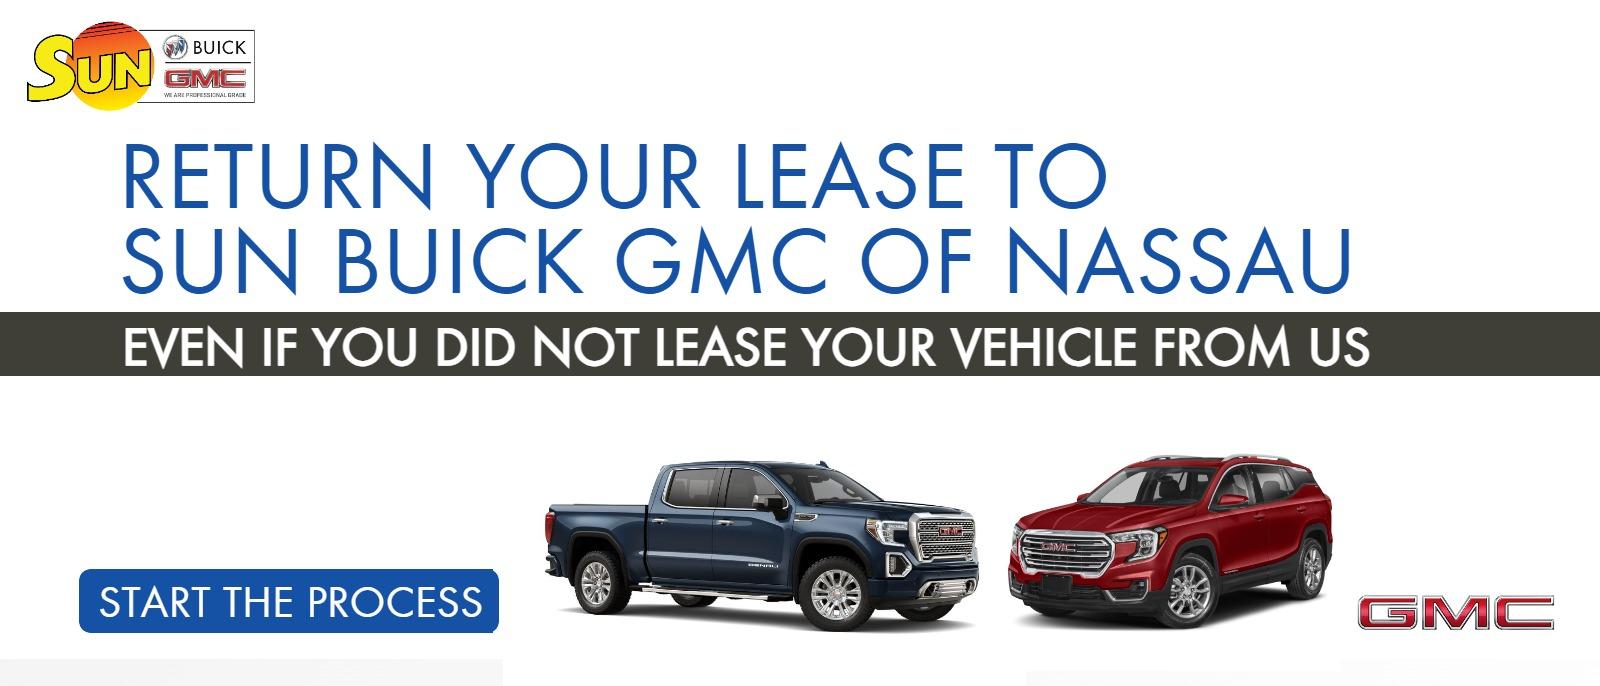 RETURN YOUR LEASE TO SUN BUICK GMC OF NASSAU 
EVEN IF YOU DID NOT LEASE YOUR VEHICLE FROM US